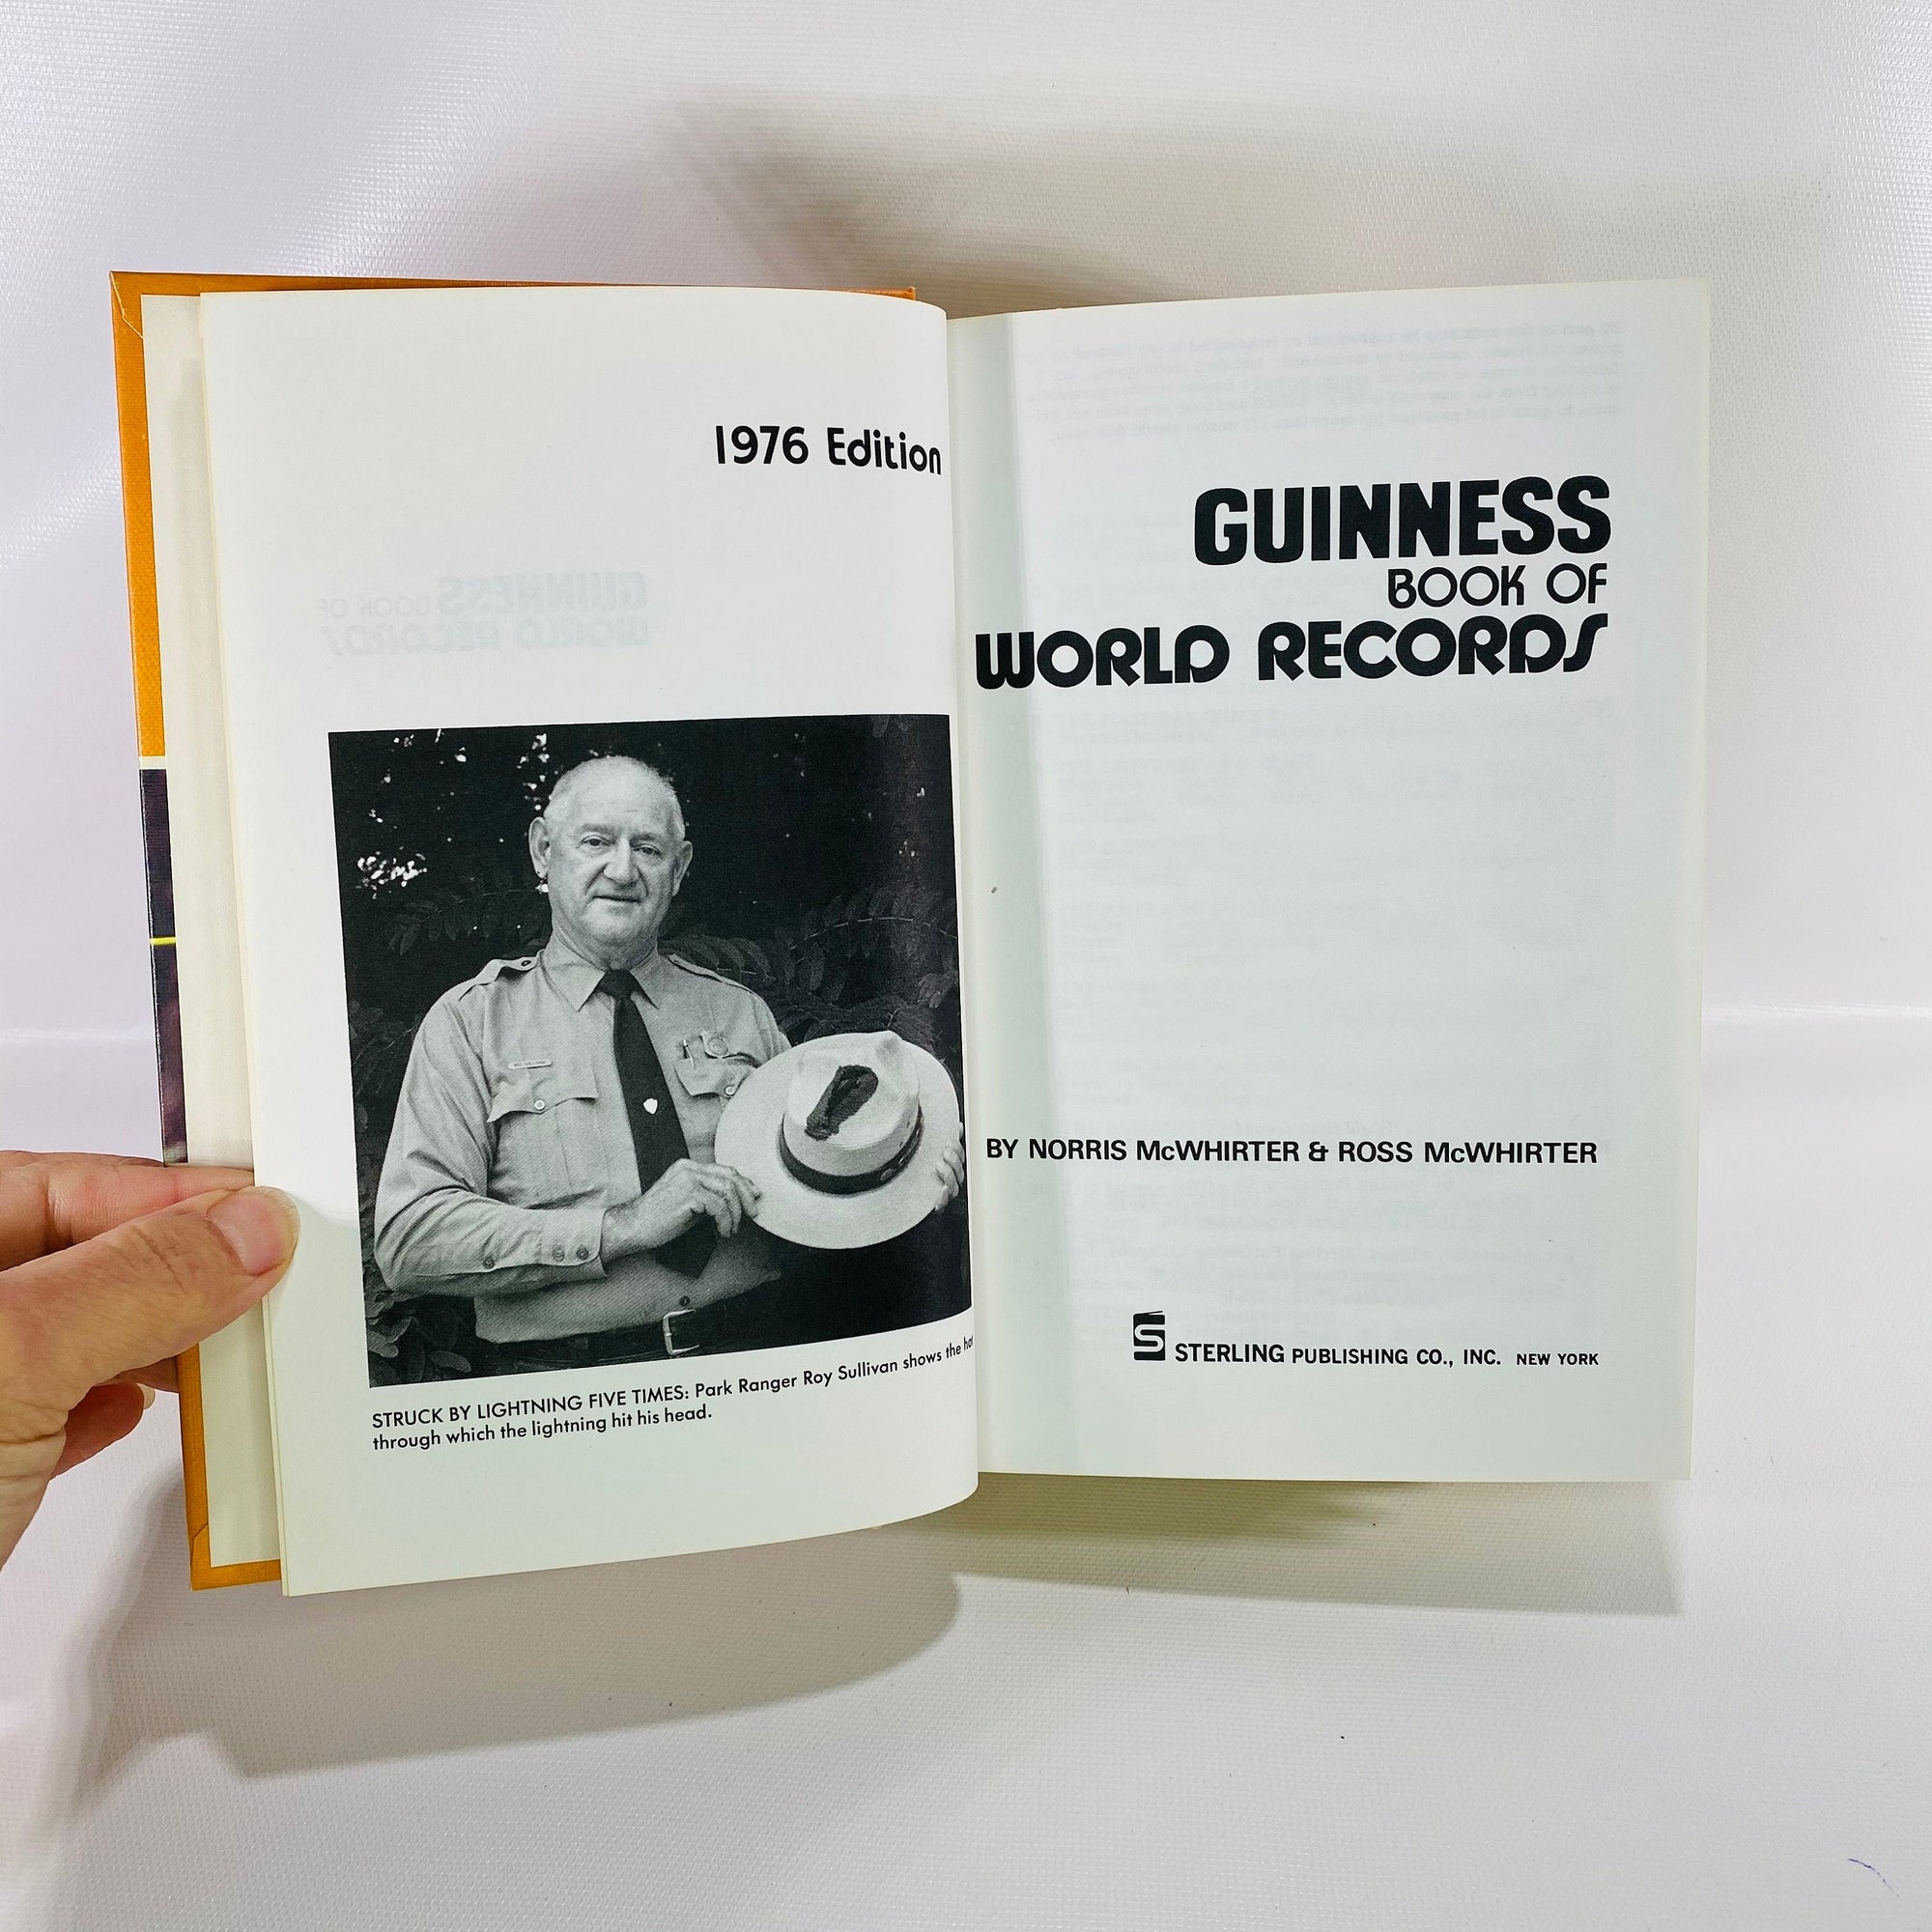 Guinness Book of World Records 1976 Edition by Morris McWhirter Vintage Book